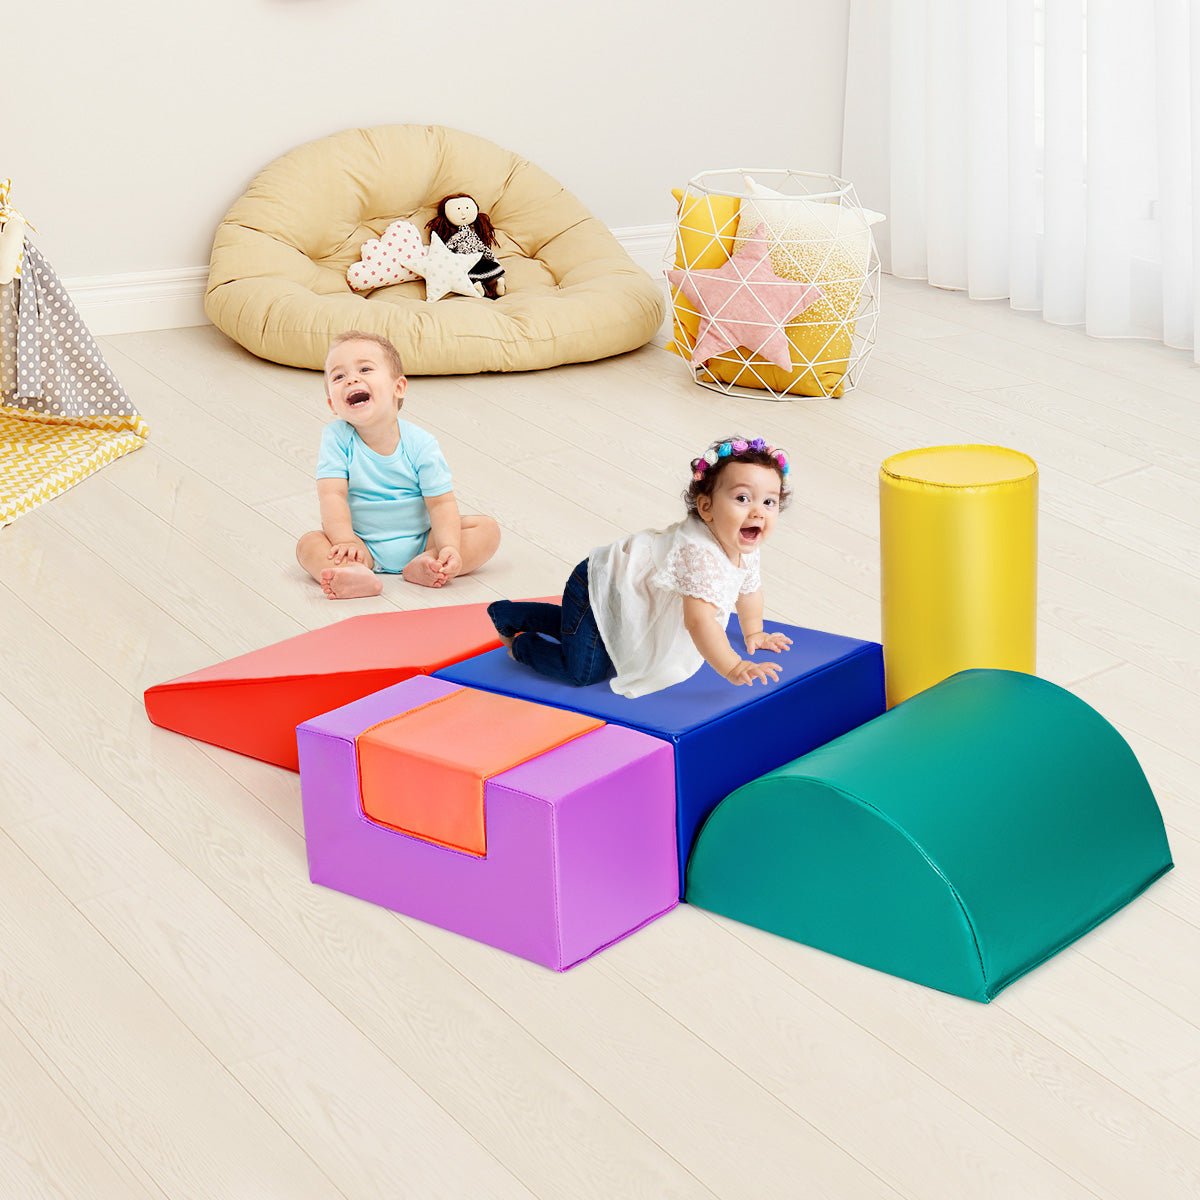 Safe Adventures: Red Foam Blocks Set for Kids Crawling and Climbing Exploration